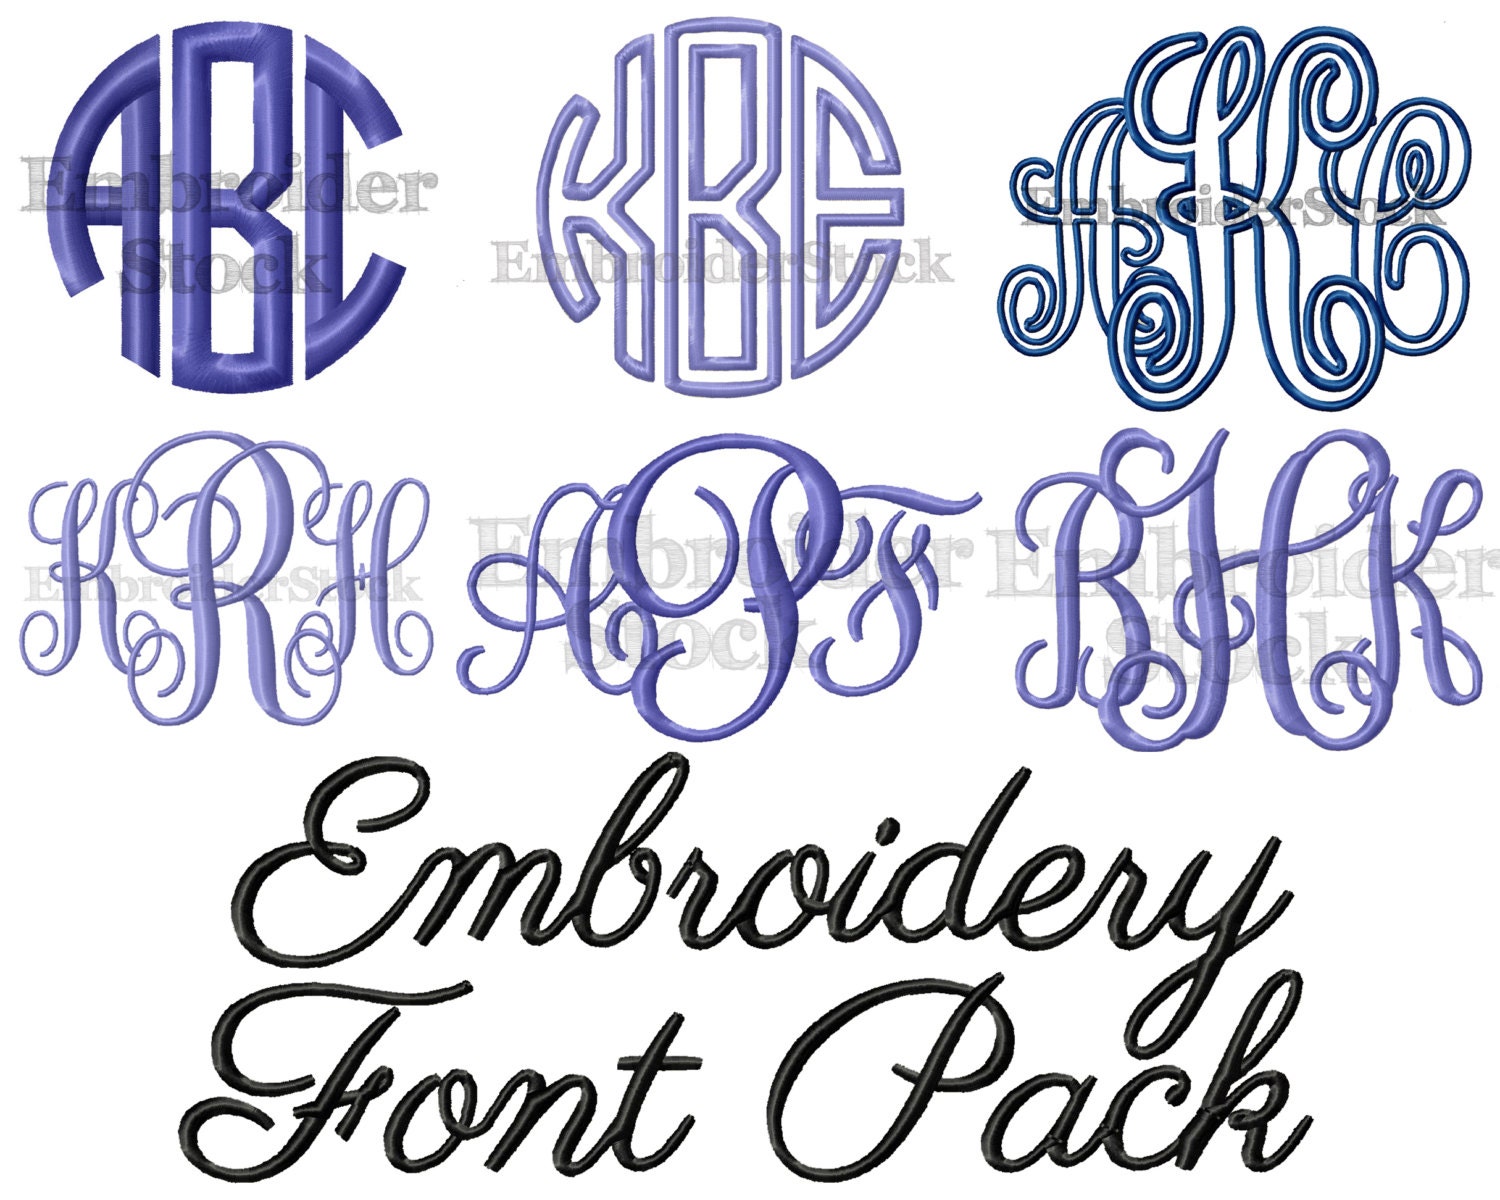 Embroidery Font Pack - 6 Machine Embroidery Fonts in 5 Sizes Each- Digital Embroidery Designs ...